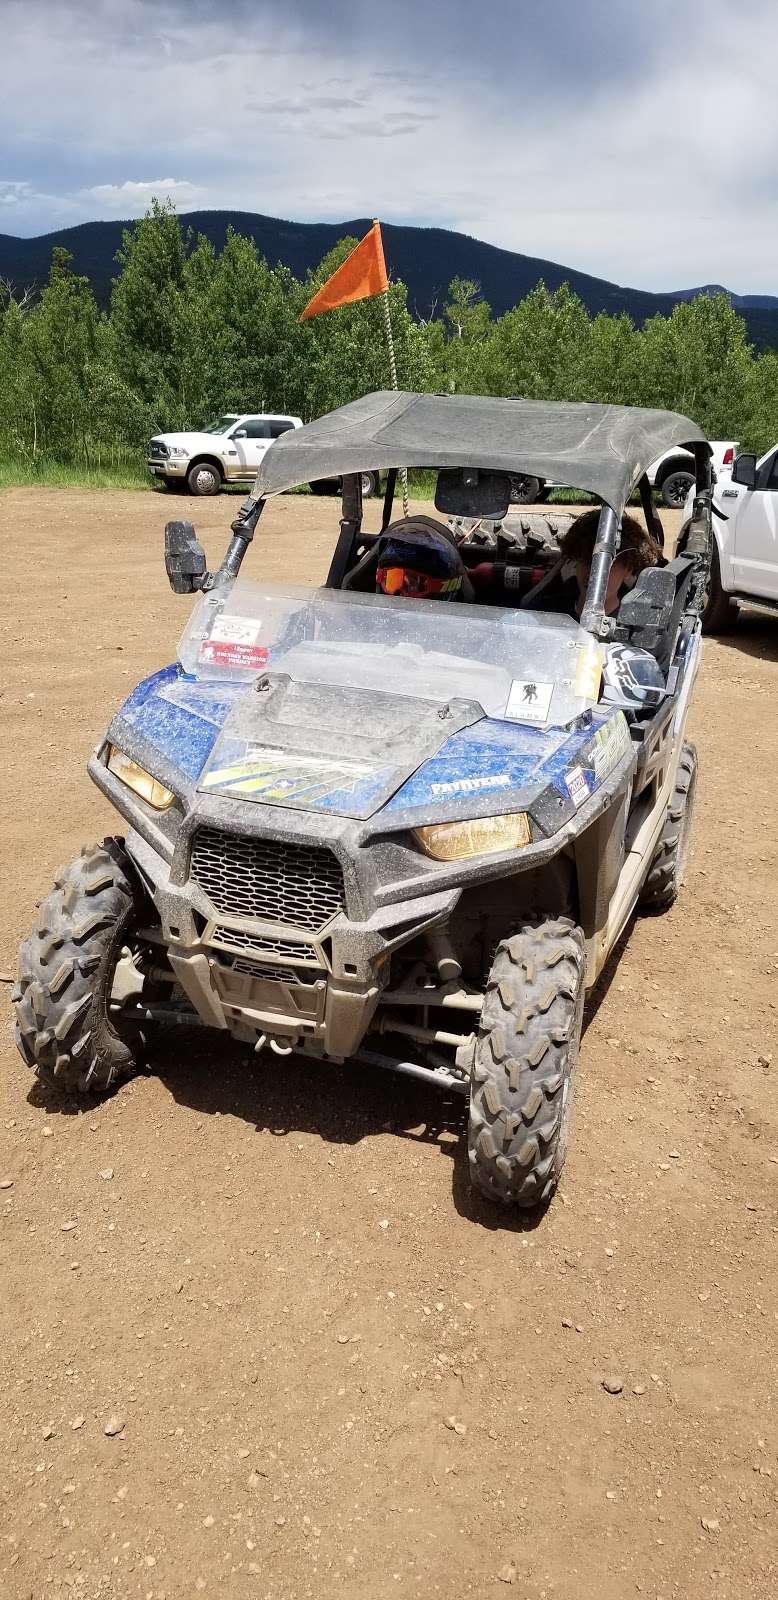 Staging Area to unload RZR | Black Hawk, CO 80422